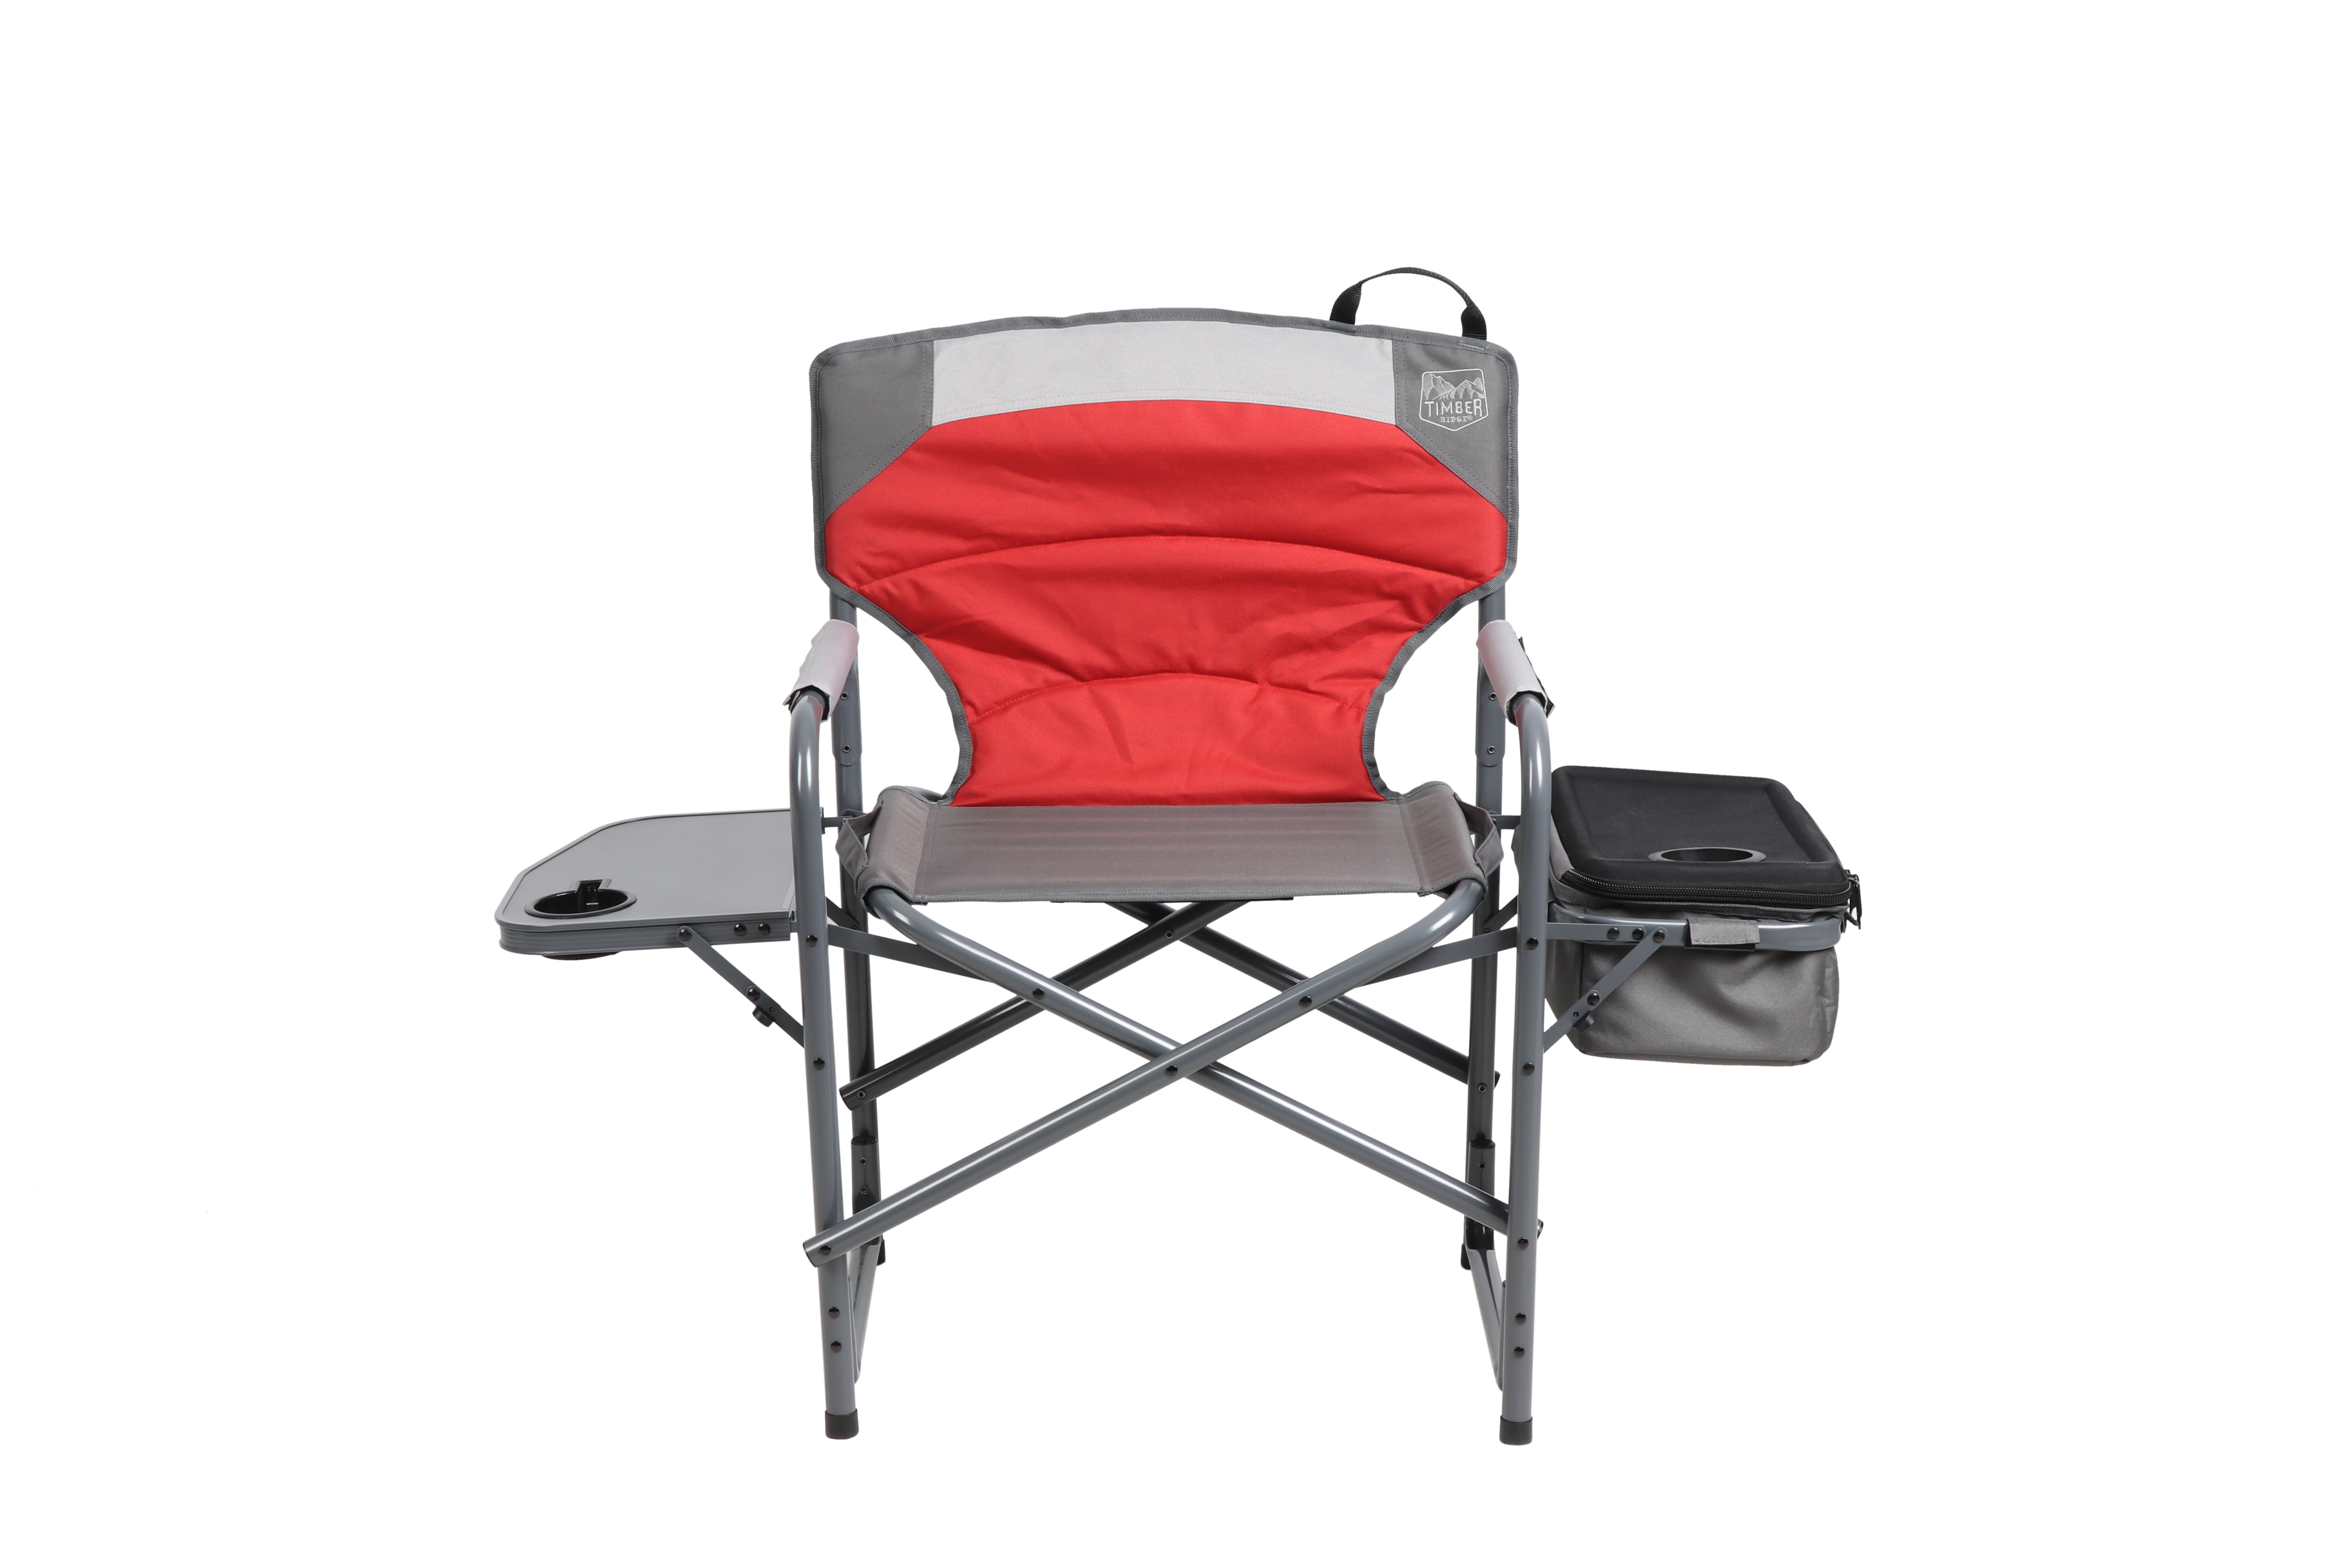 Timber Ridge Laurel Director Camping Chair, Red and Gray, Adult, 32in  Height 